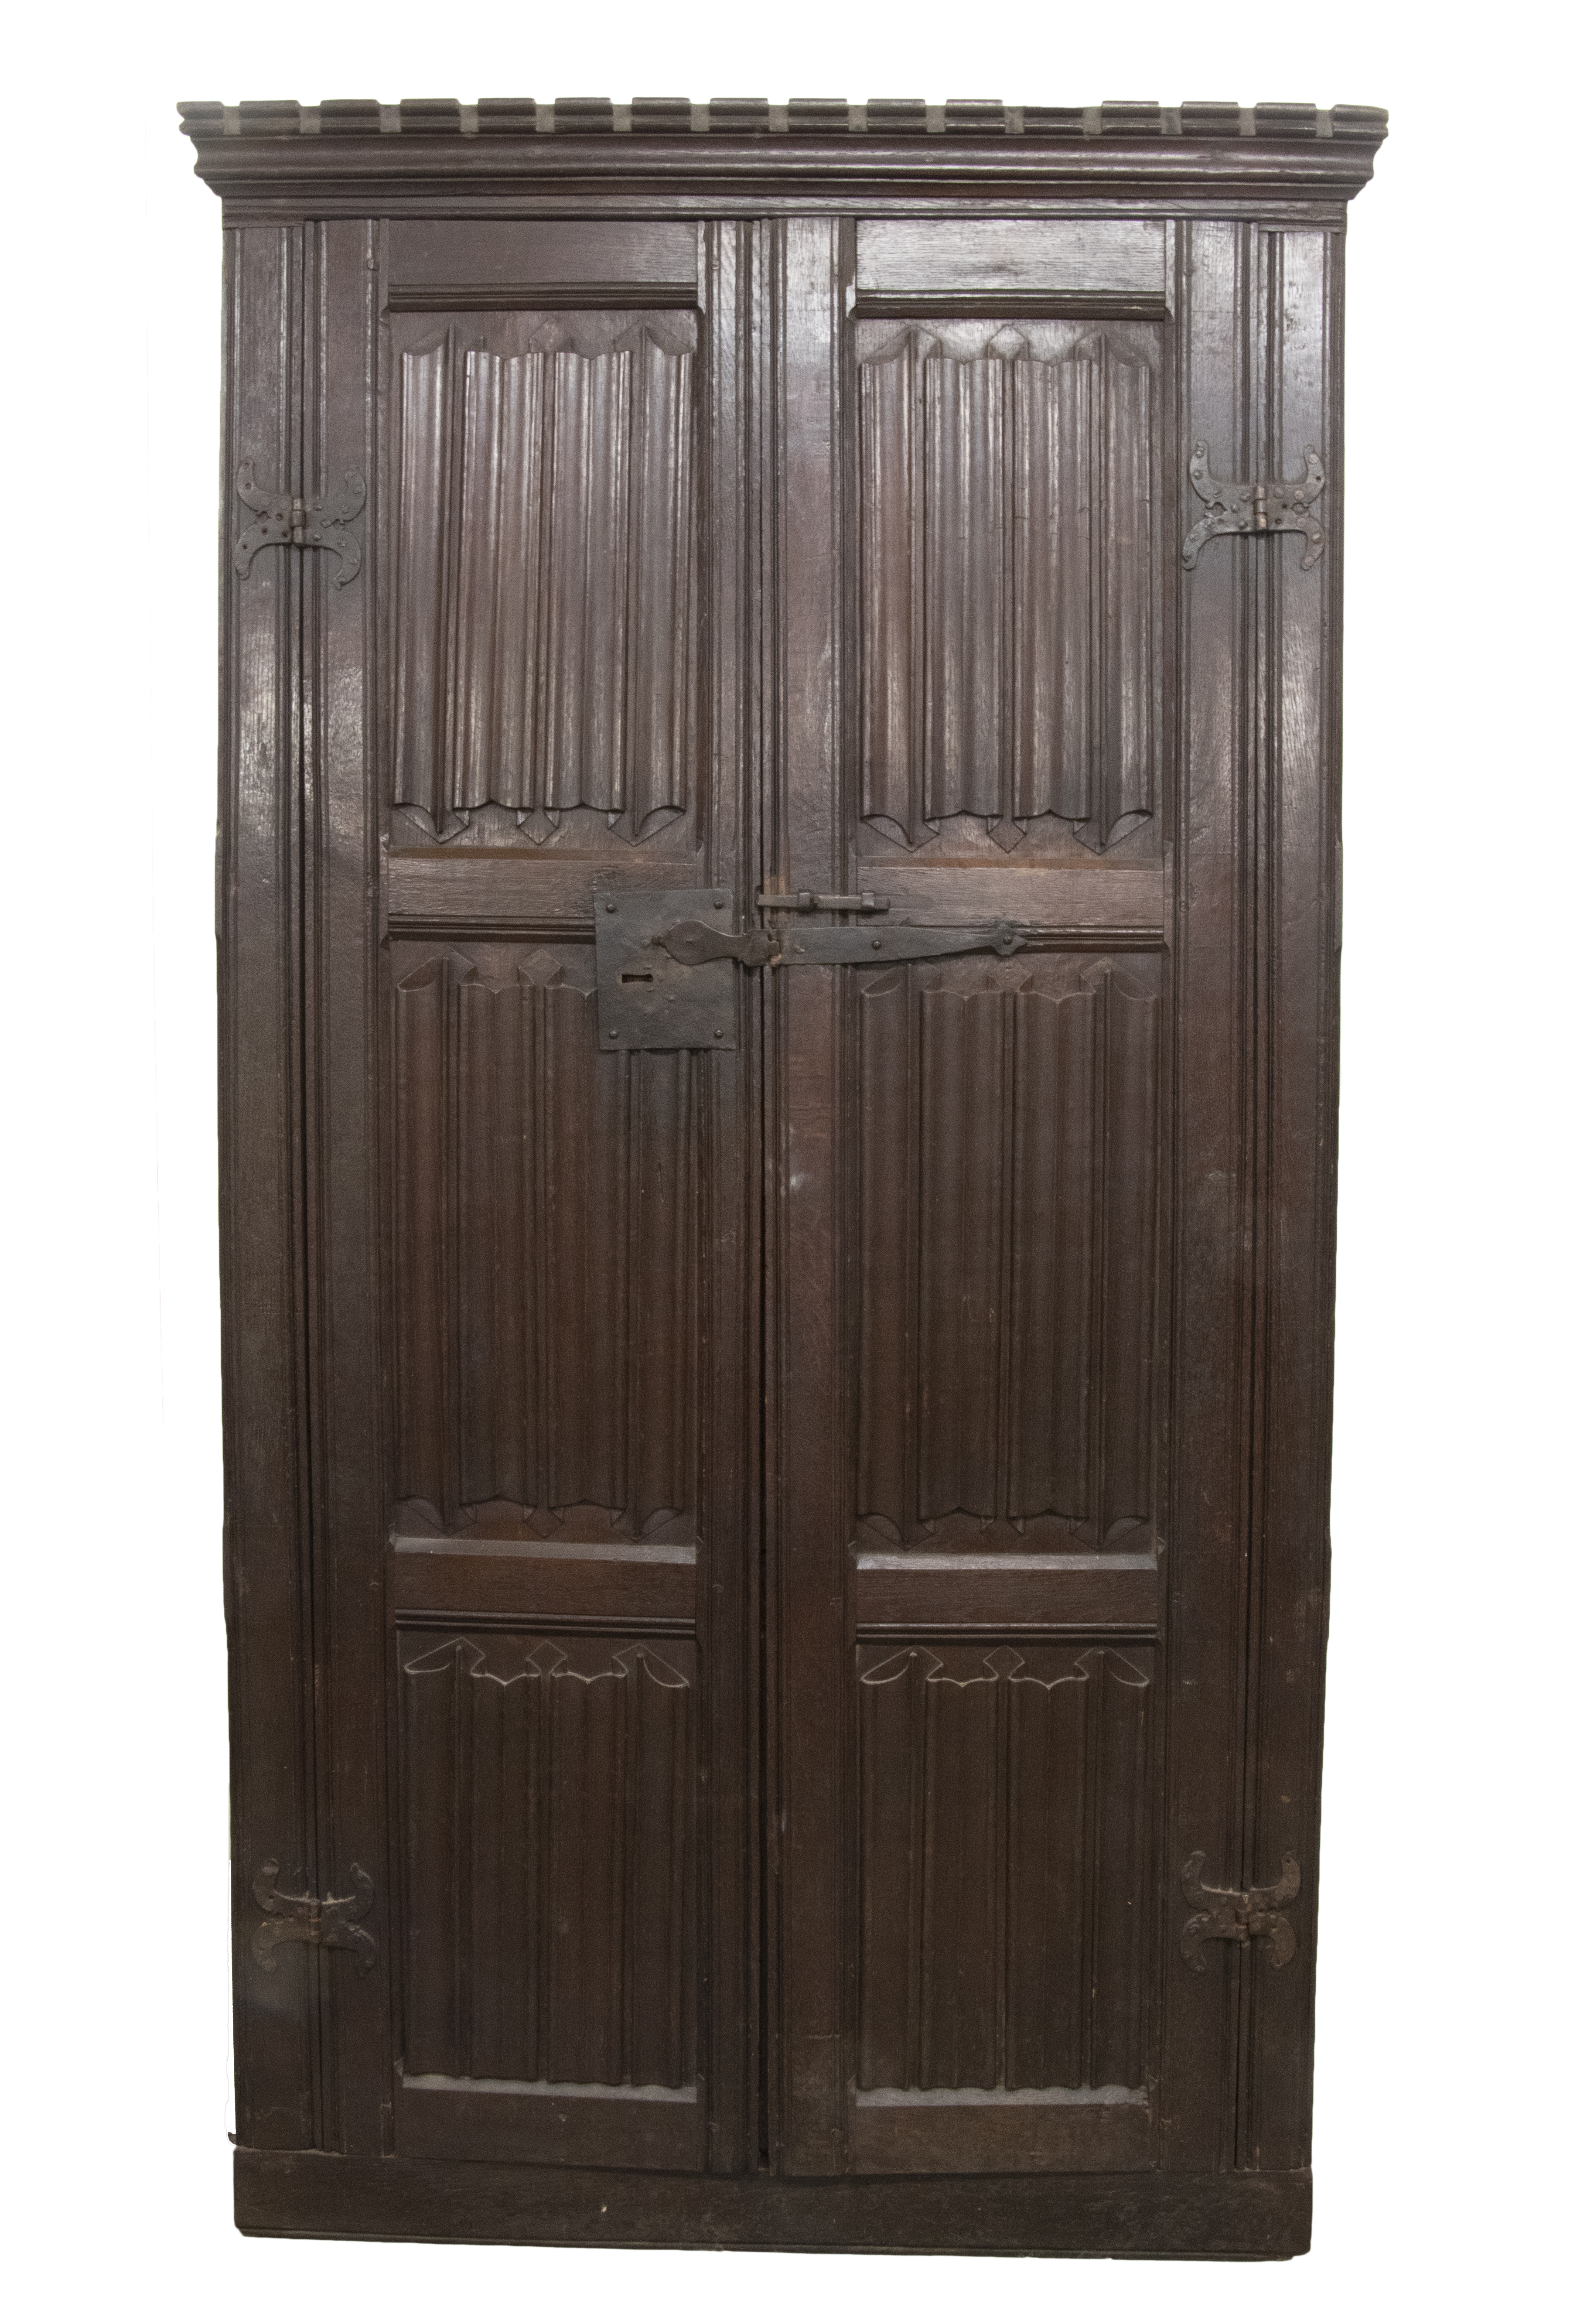 EARLY ENGLISH CARVED CUPBOARD DOORS